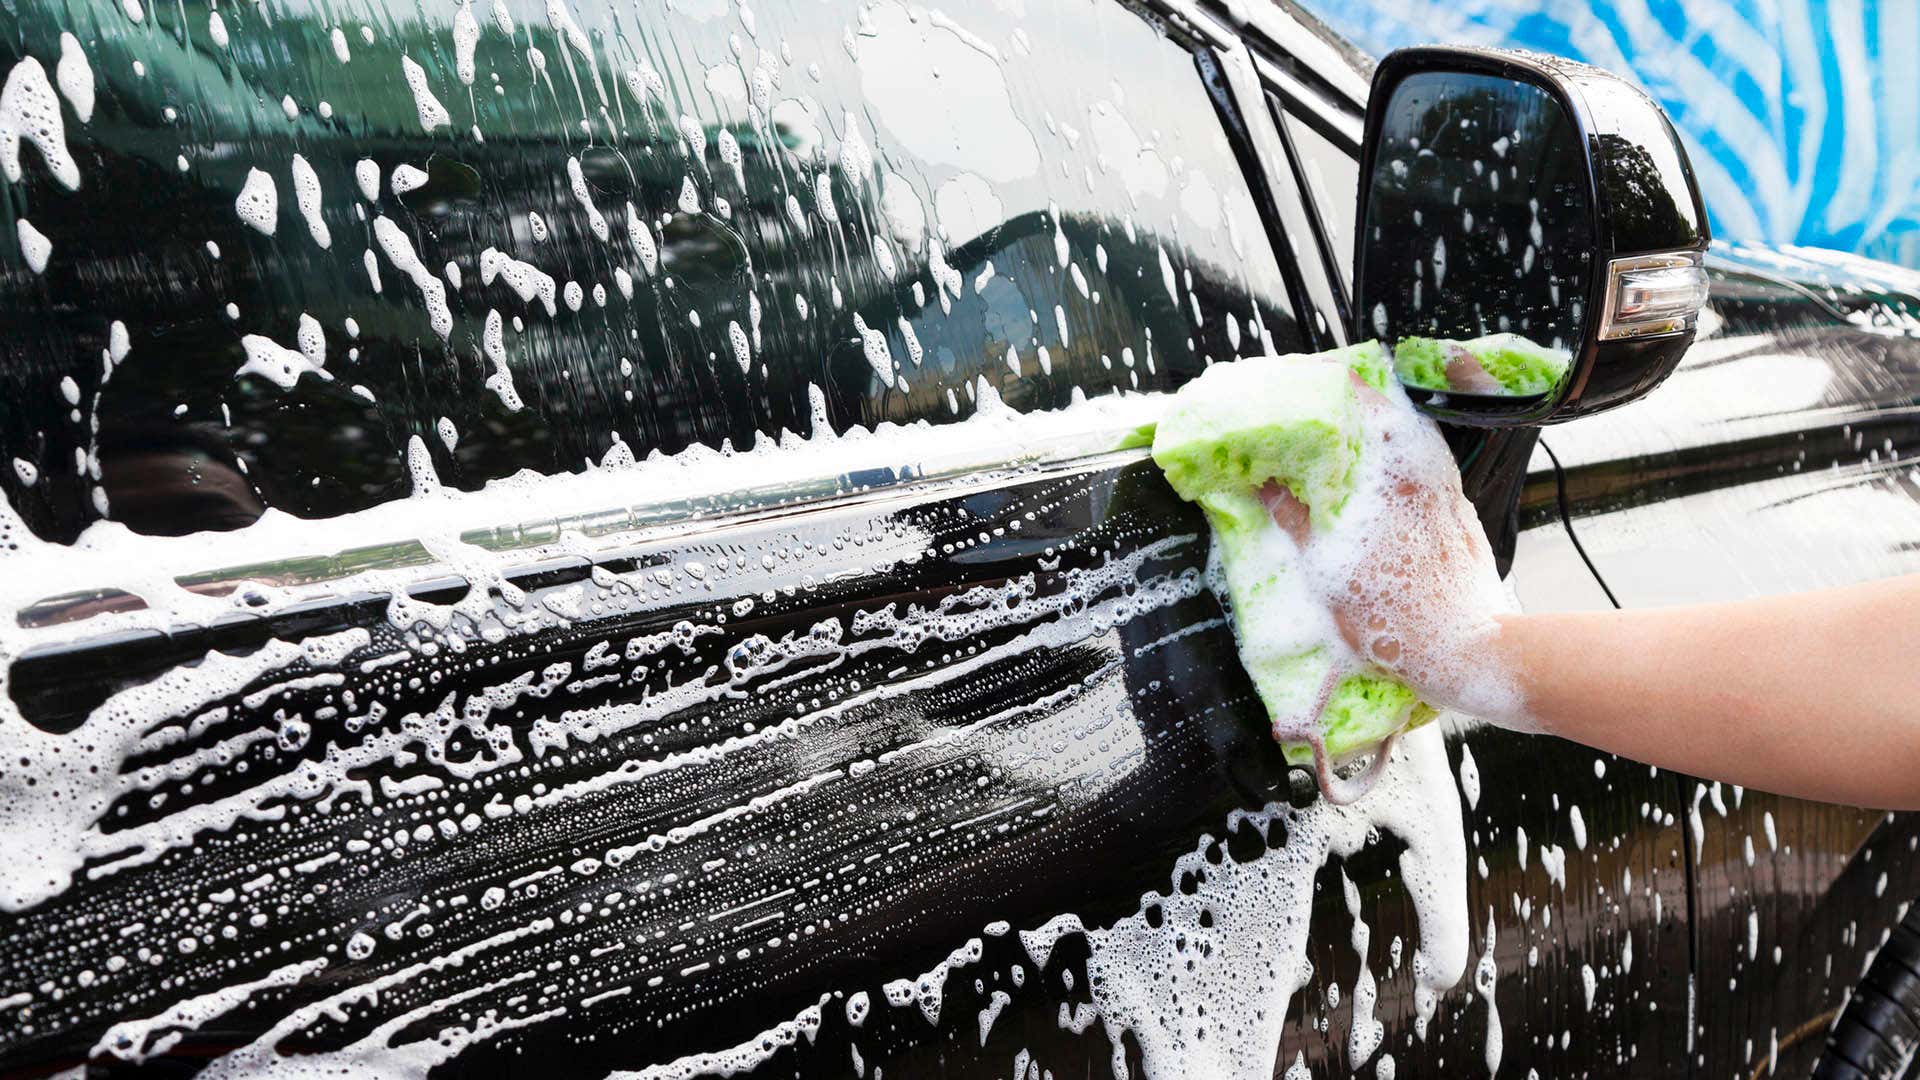 A hand using a sponge to wipe a soapy car door.